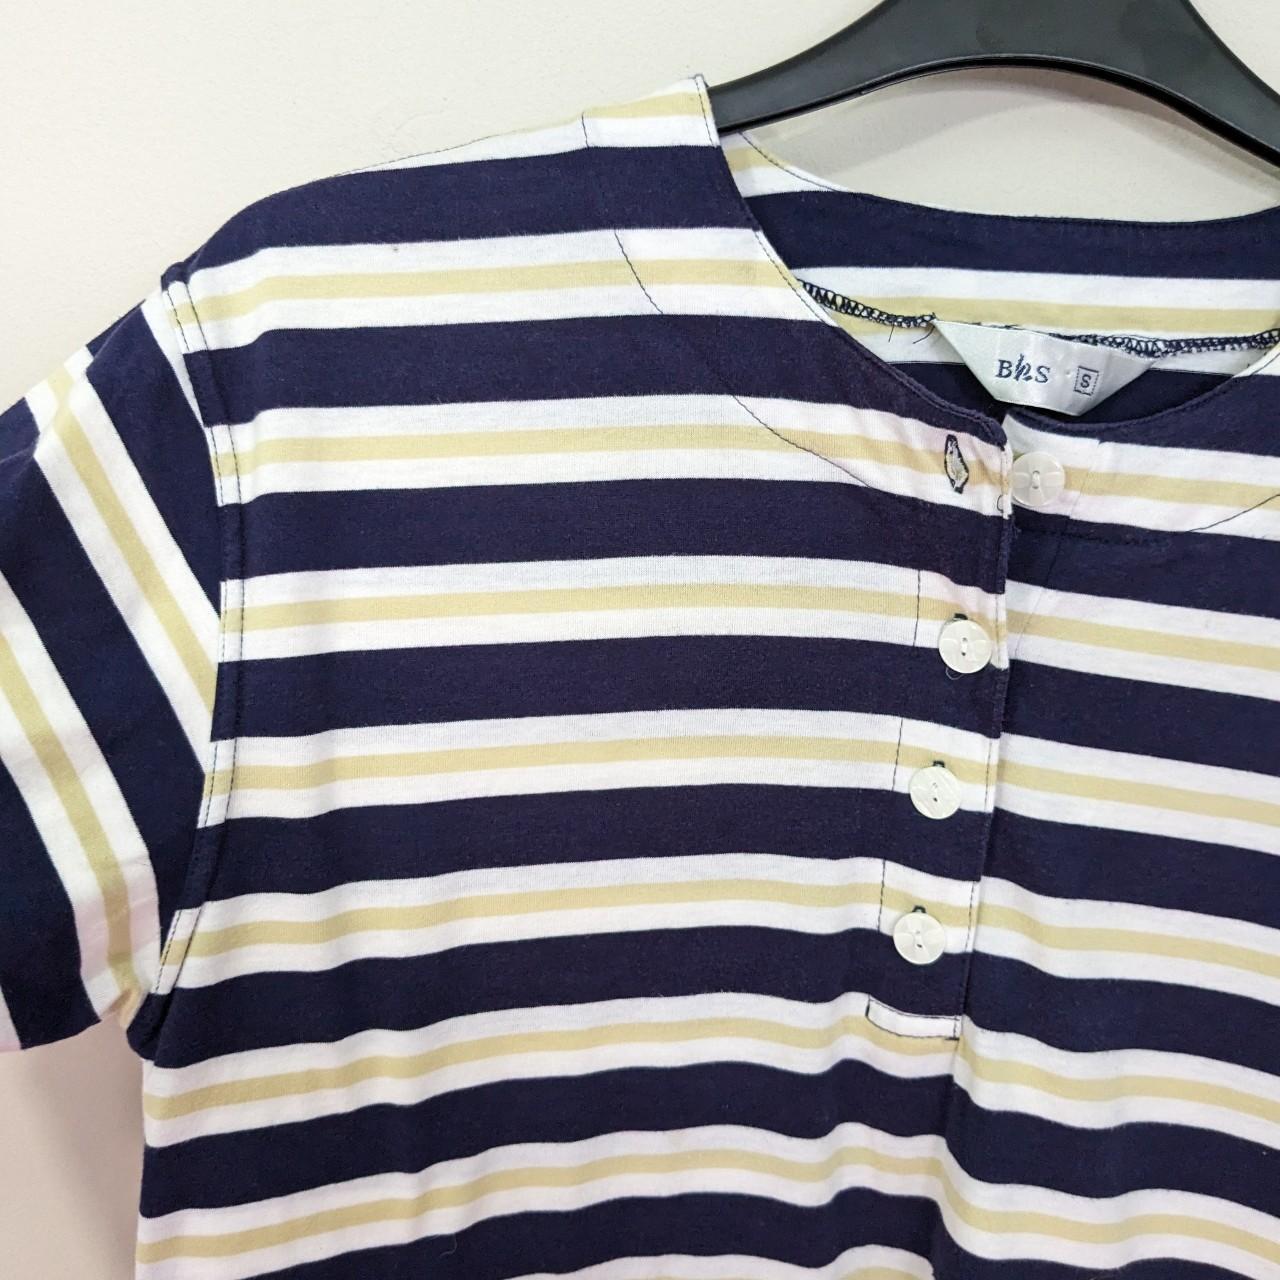 Retro BHS Striped T-shirt with Button Detail... - Depop